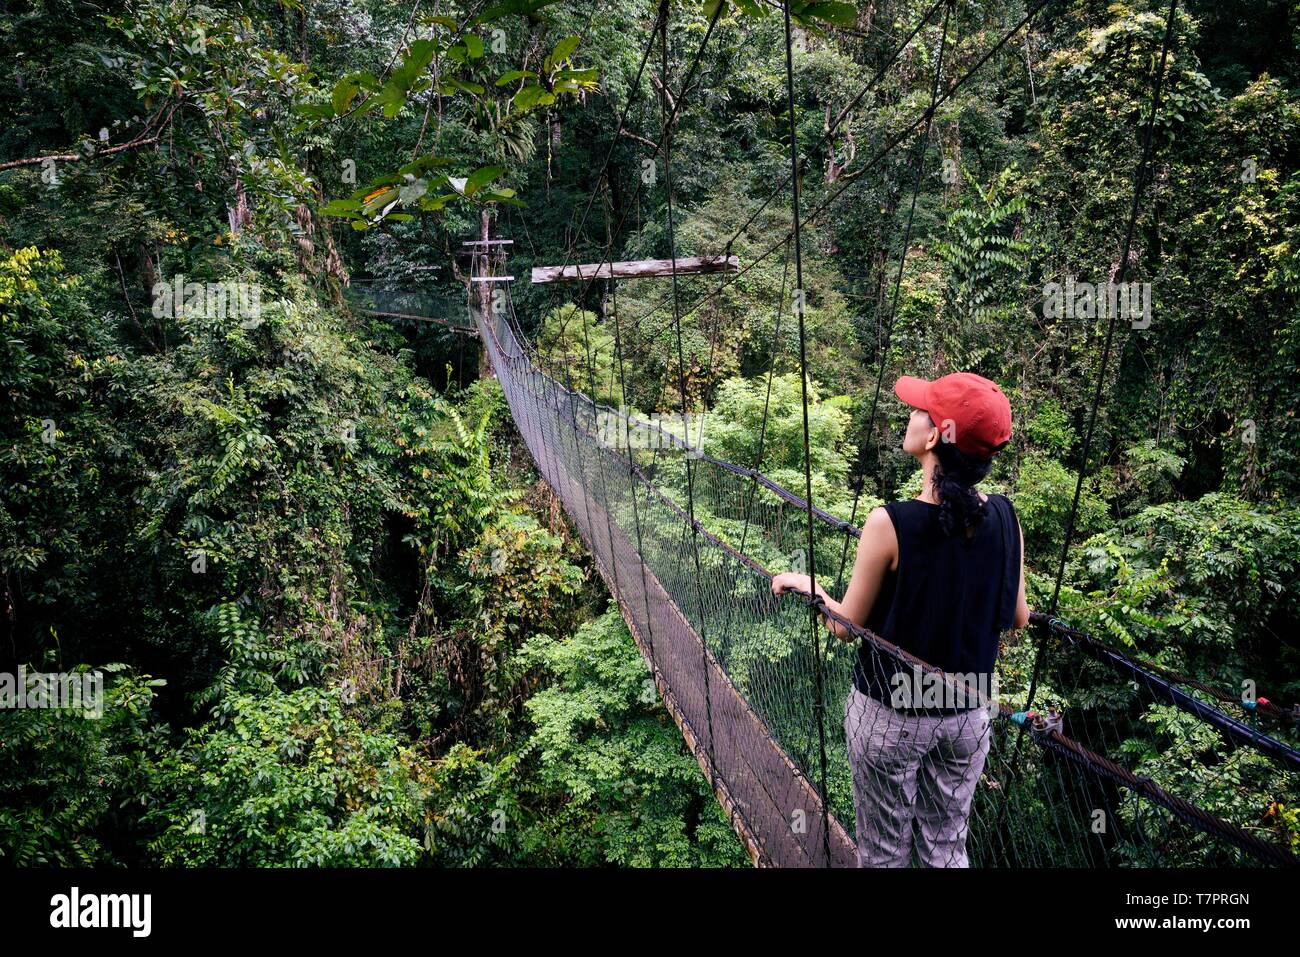 Malaysia, Borneo, Sarawak, Gunung Mulu National Park listed as World Heritage by UNESCO, woman at the Canopy walk in the rainforest Stock Photo